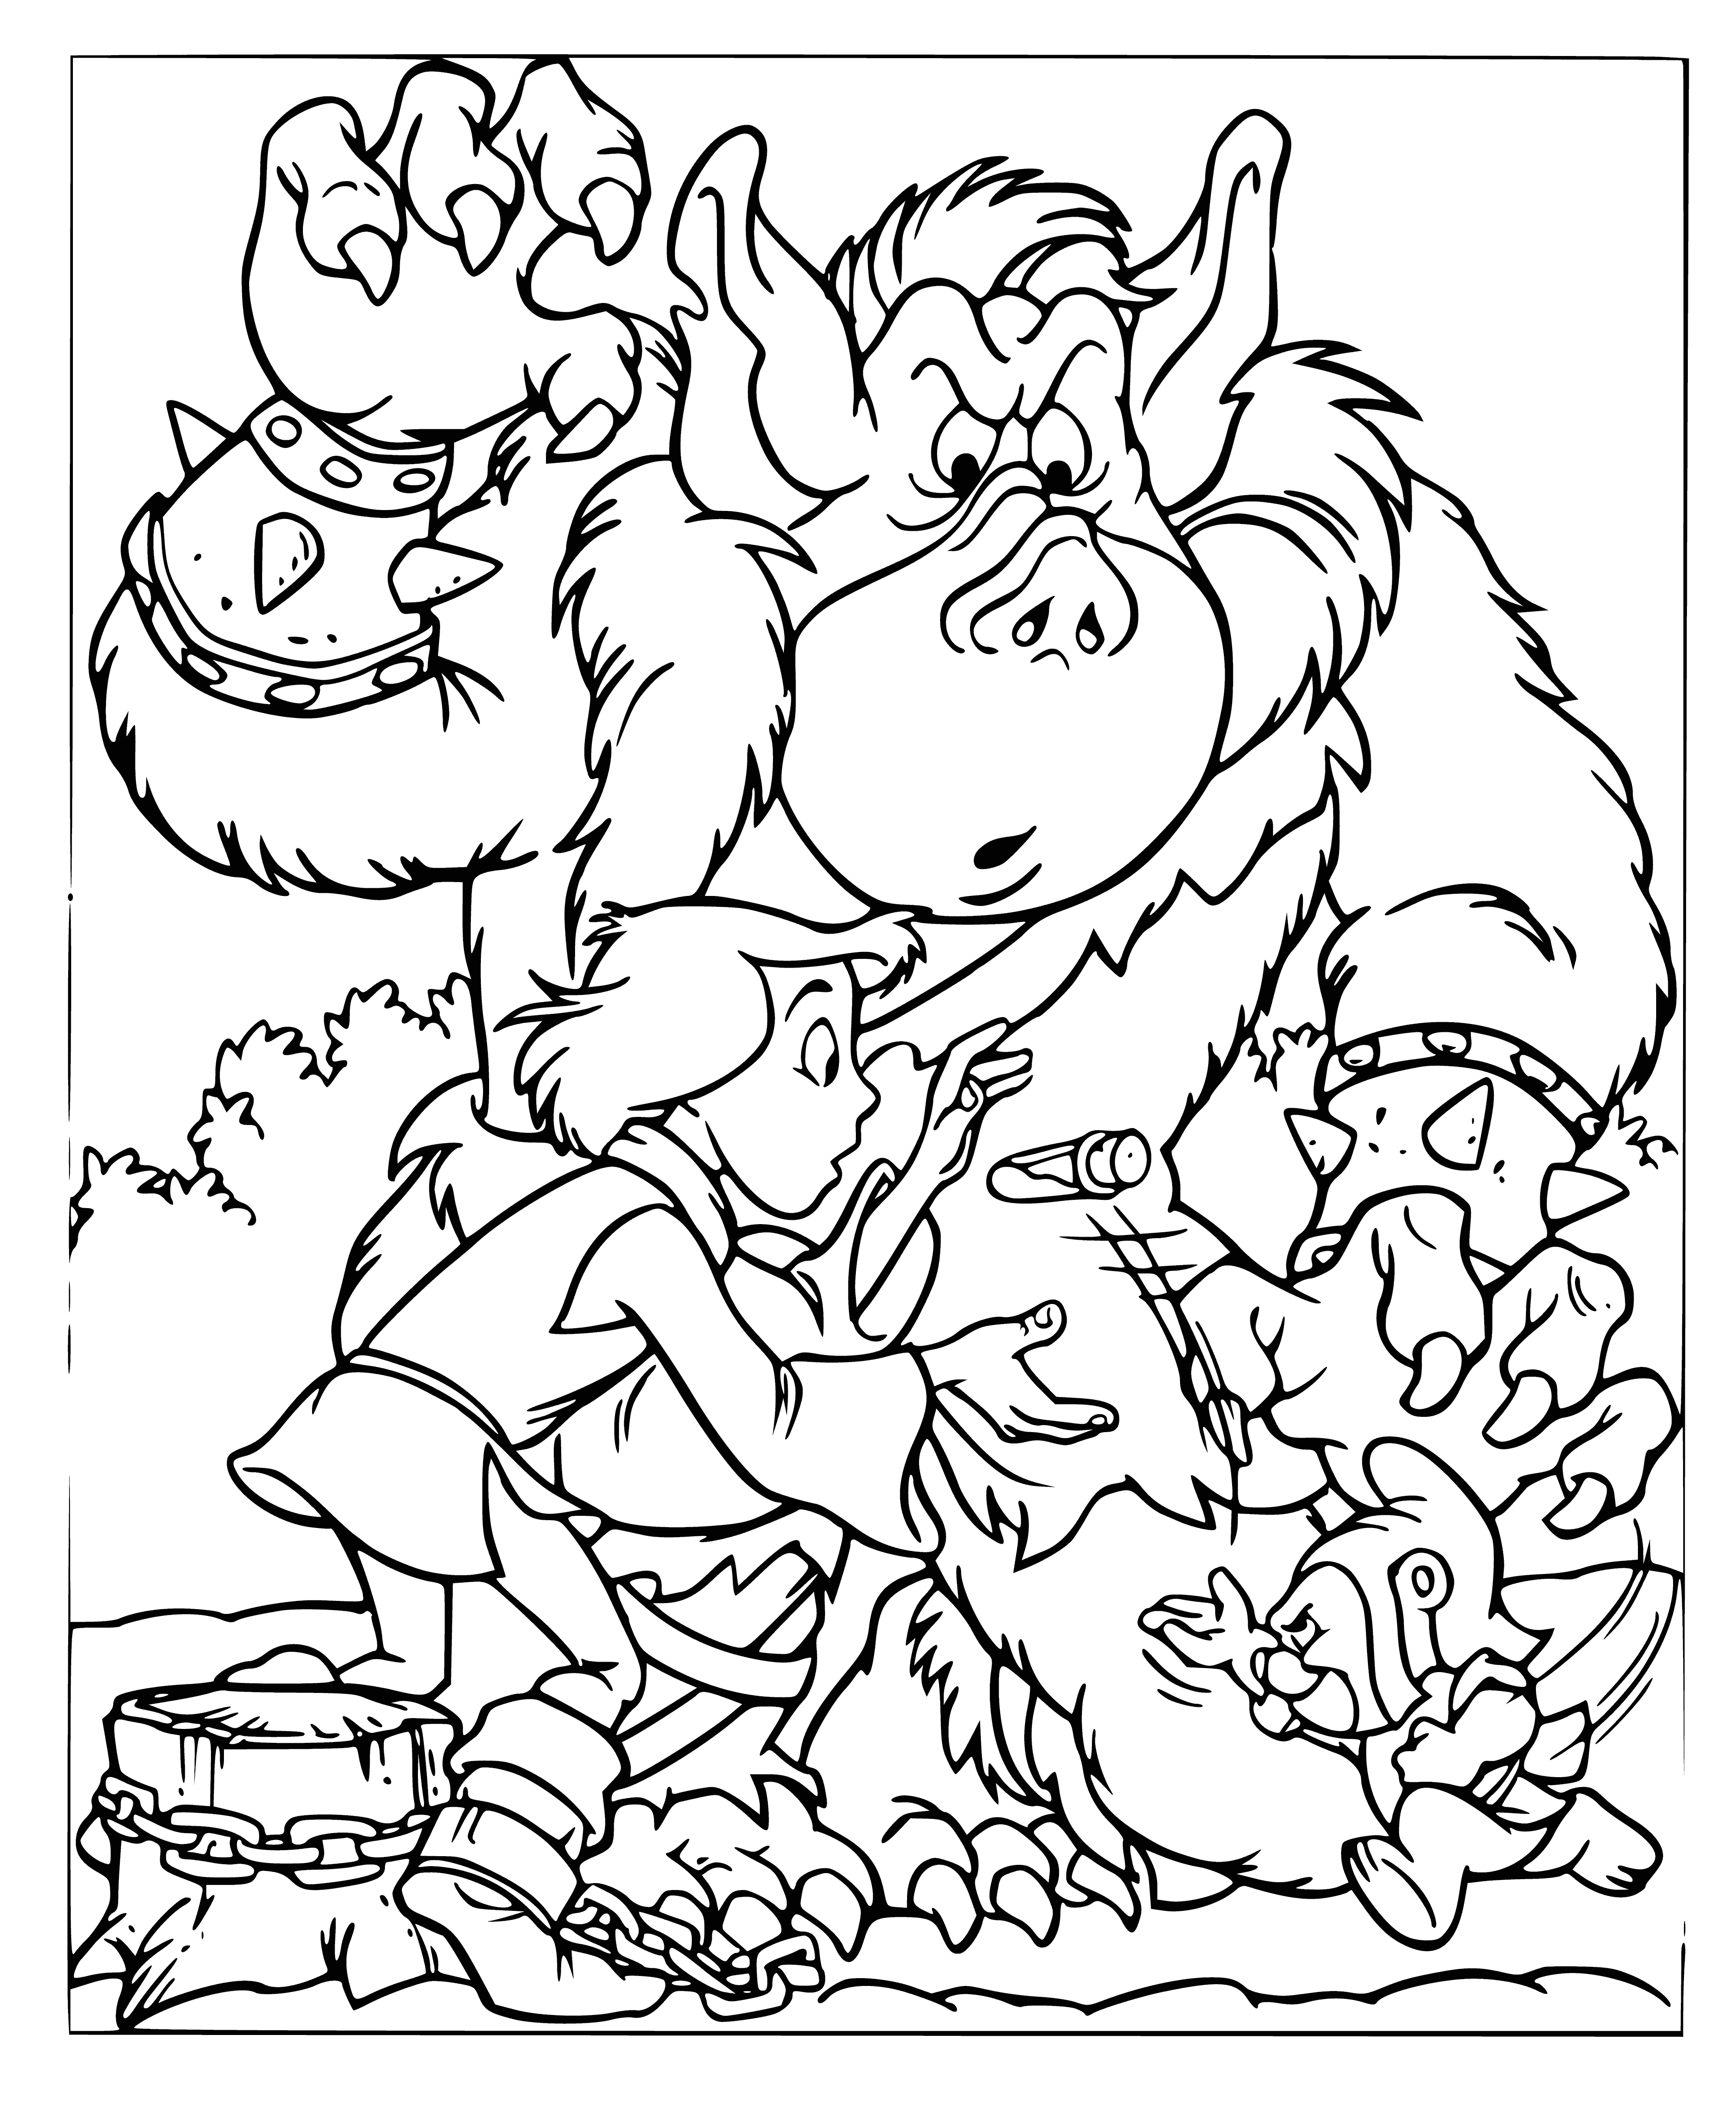 coloring page: Gummi Bears and Goblin Bears are two types of candies, shaped like bears. Gummi Bears are chewy and gummy while Goblin Bears are hard and crunchy. Gummi Bears are brown and Goblin Bears are green.